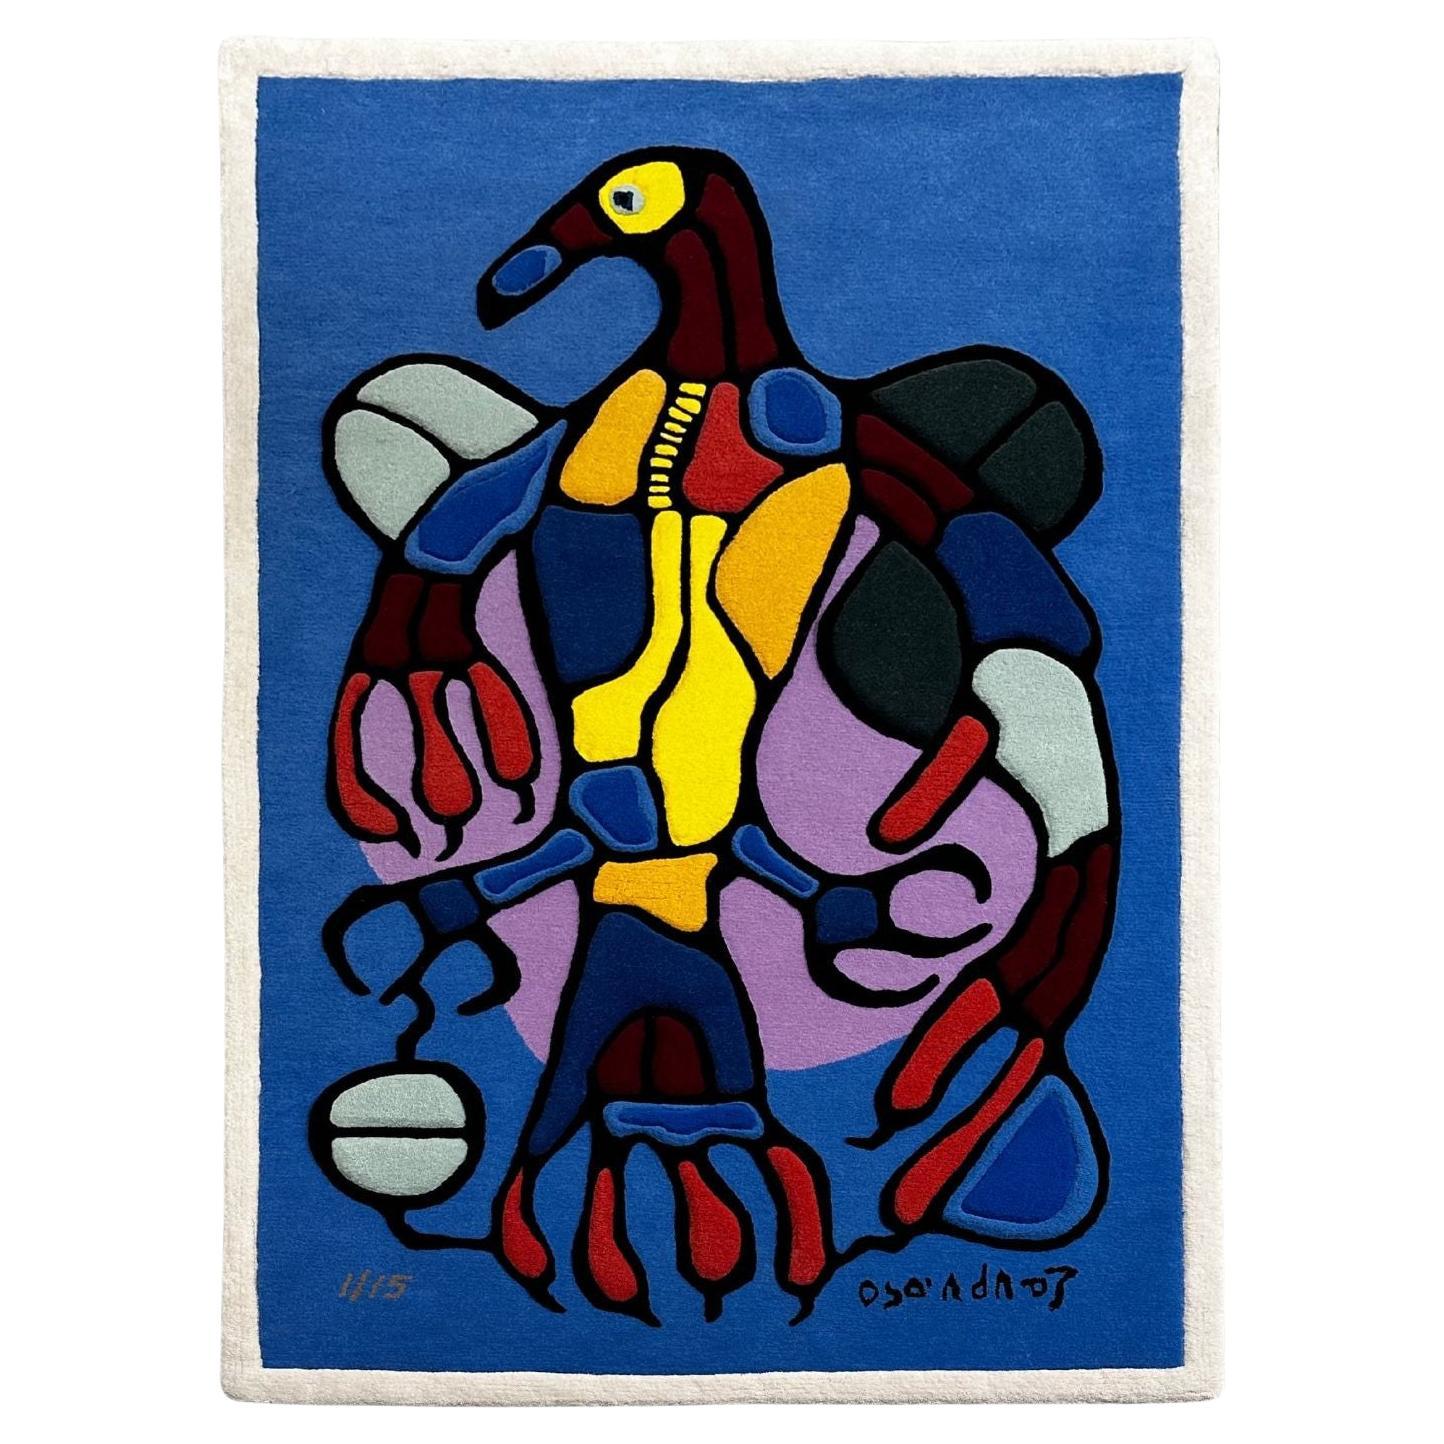 Norval Morrisseau "Astral Thunderbird" Wall Hanging Tapestry Signed, 1970